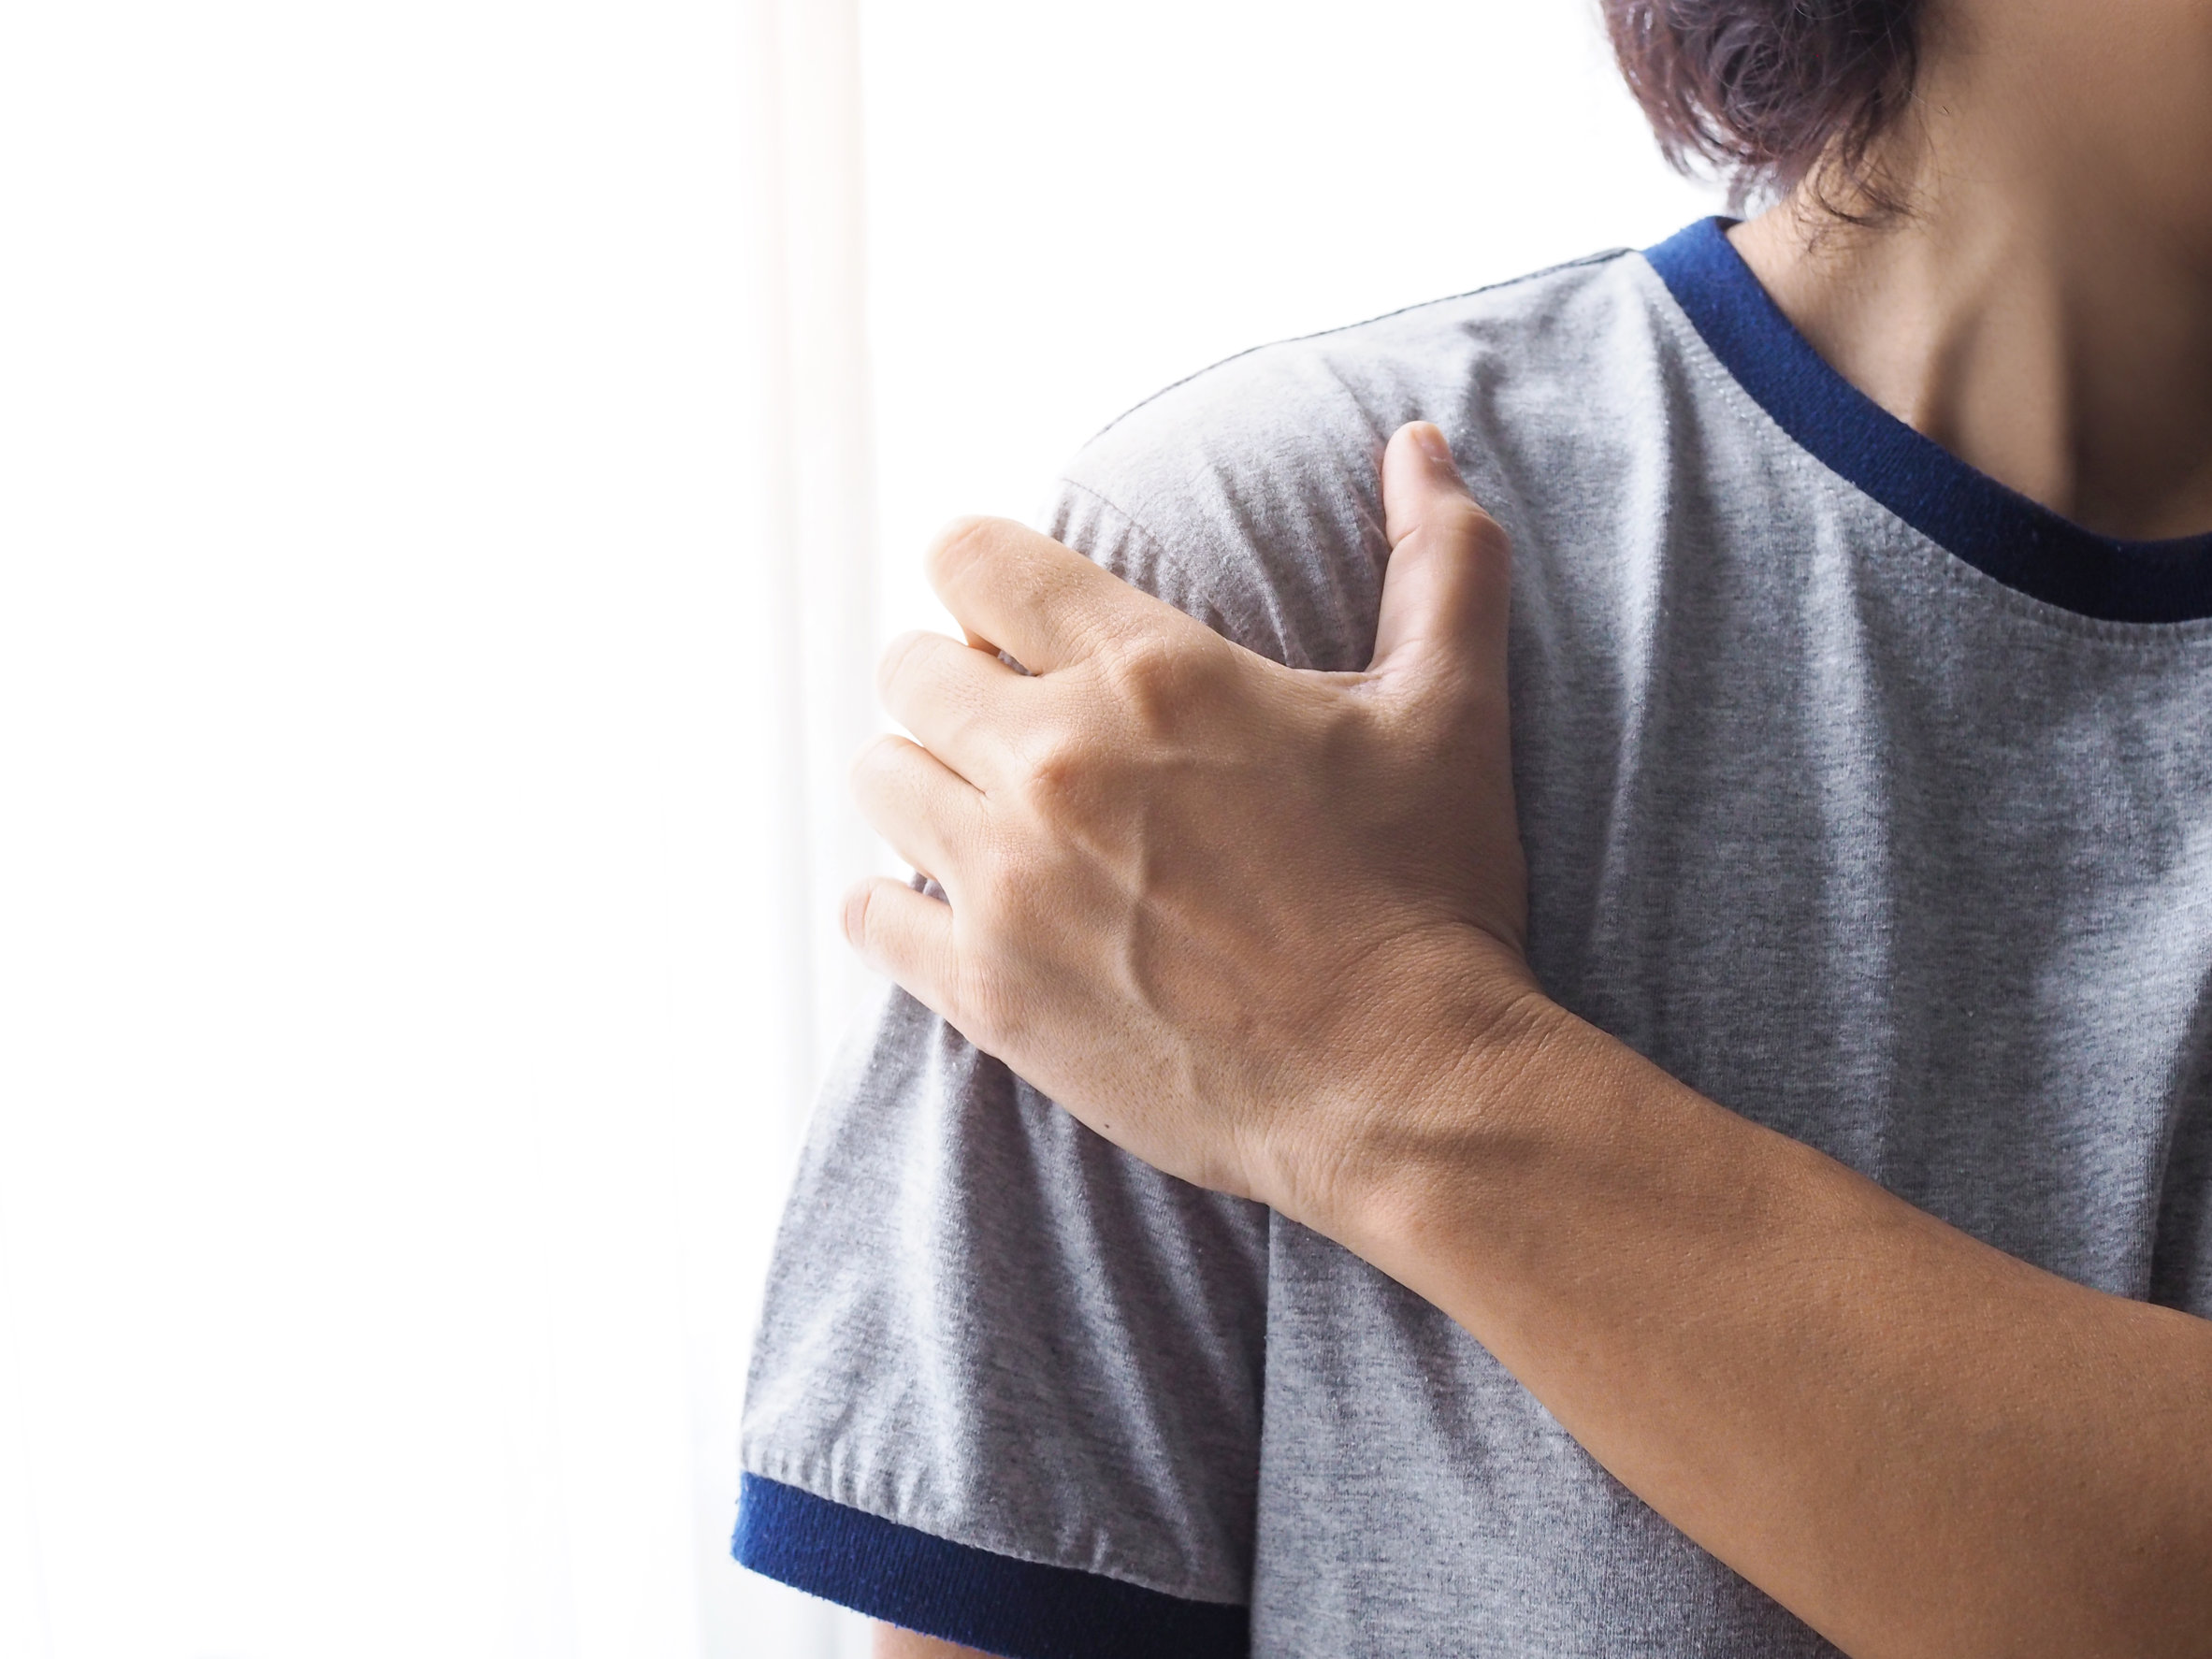 What is Frozen Shoulder Syndrome?